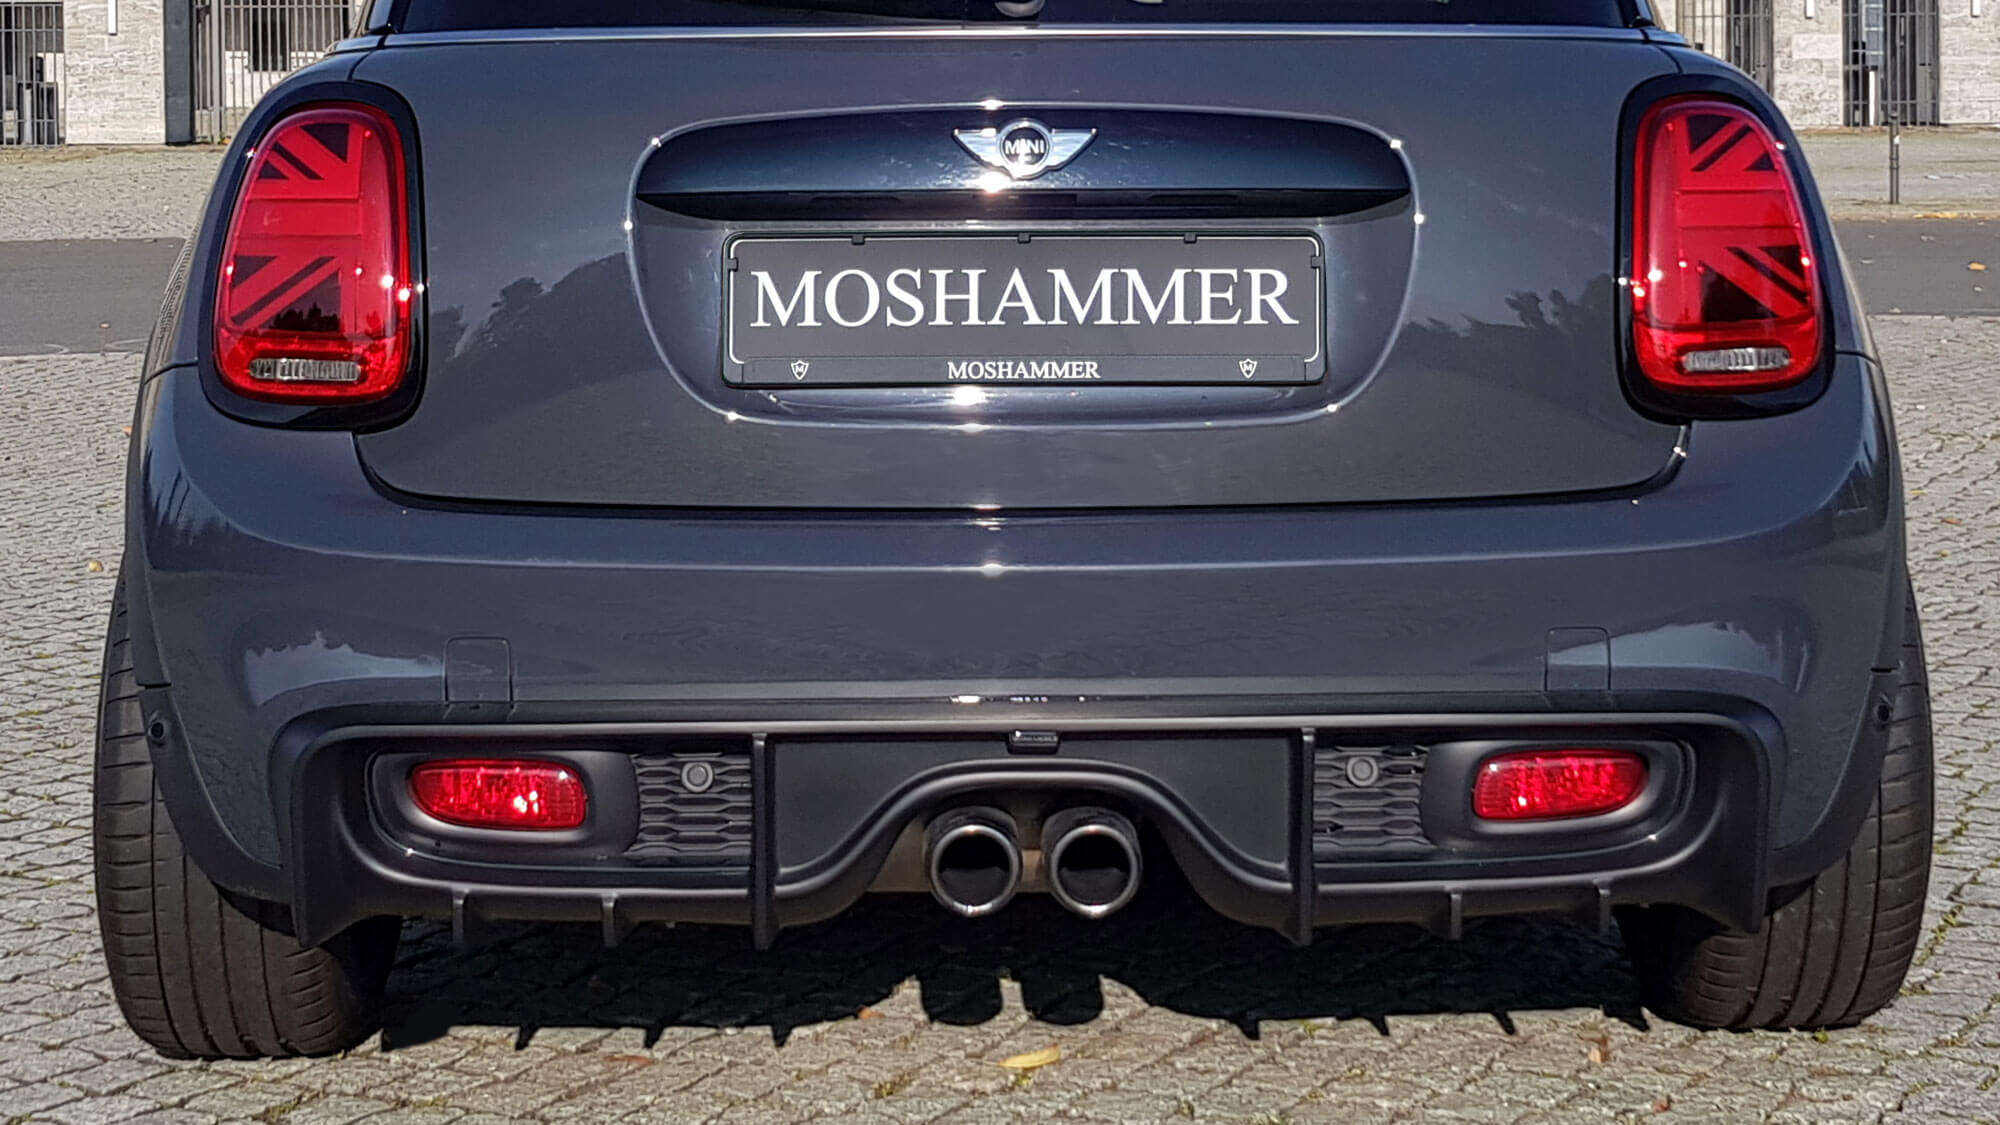 What Is A Rear Diffuser For MINI Cooper